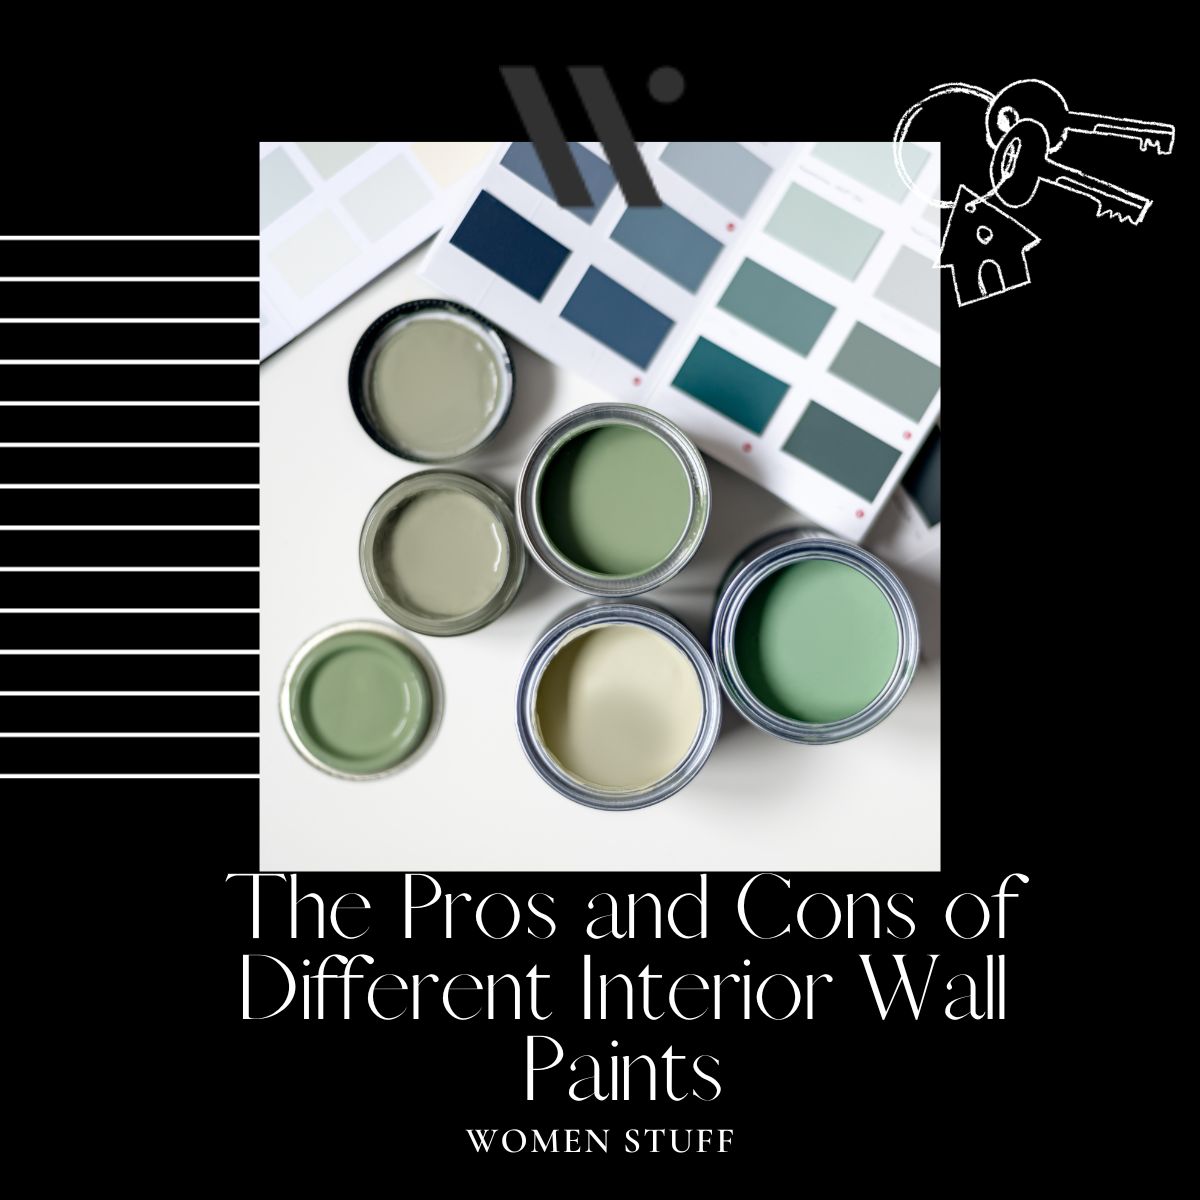 The Pros and Cons of Different Interior Wall Paints